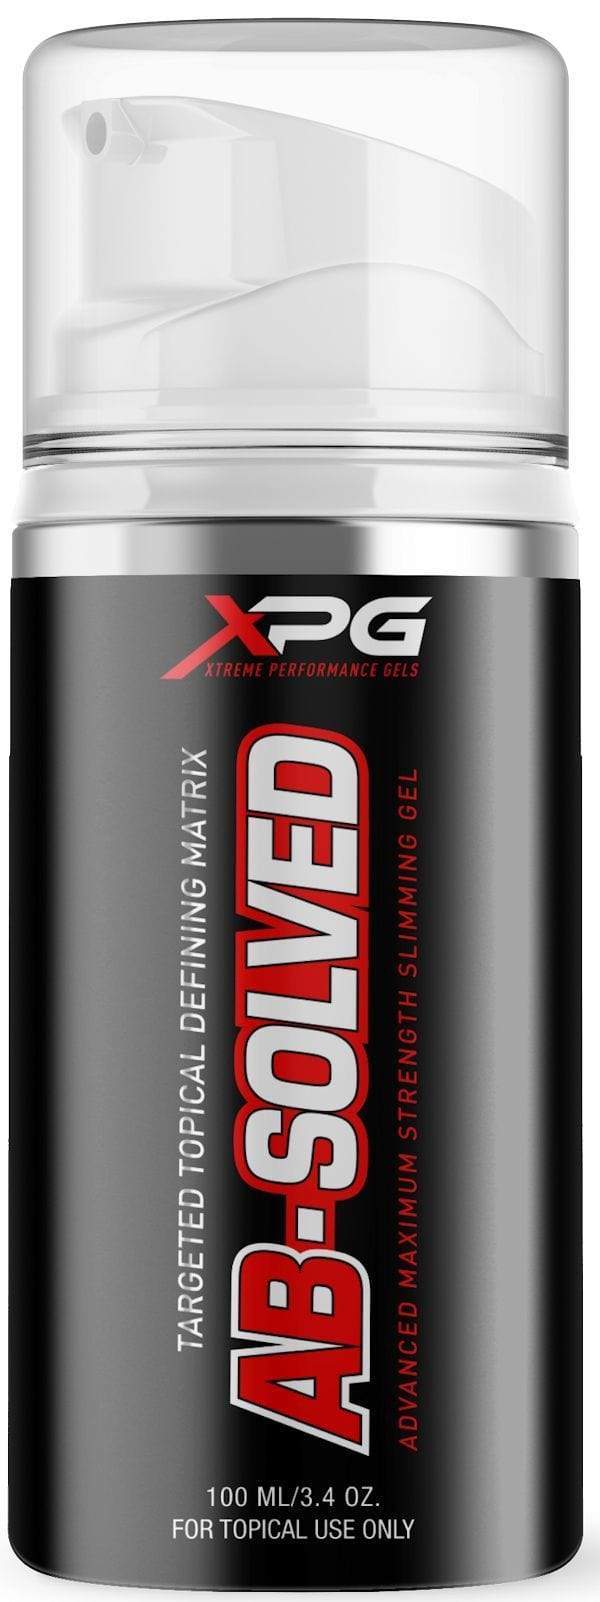 Xtreme Performance Gels XPG AB-Solved Targeted Topical Defining |Lowcostvitamin.com